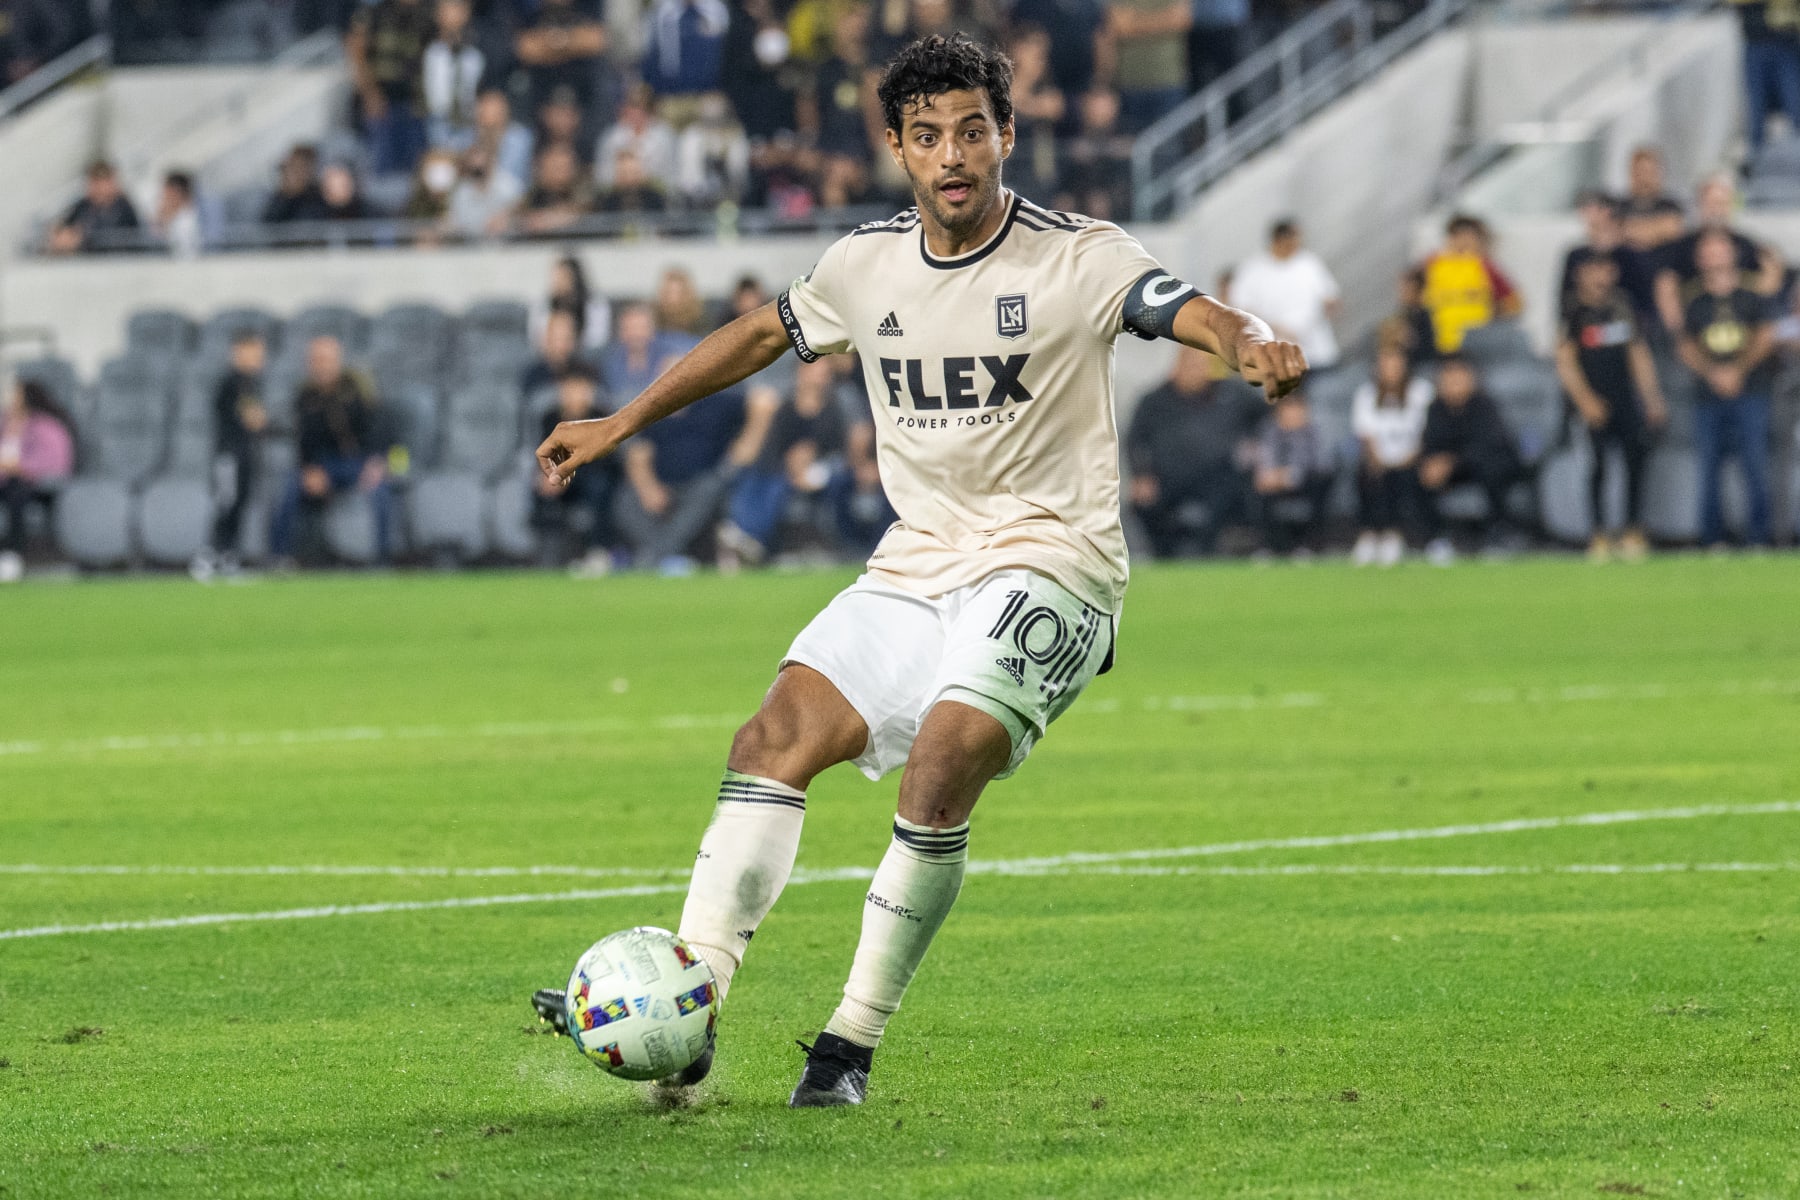 THE STARS WILL REALLY COME OUT: It will be MLS all-stars vs. their LIGA MX  counterparts in 2020 game - Front Row Soccer